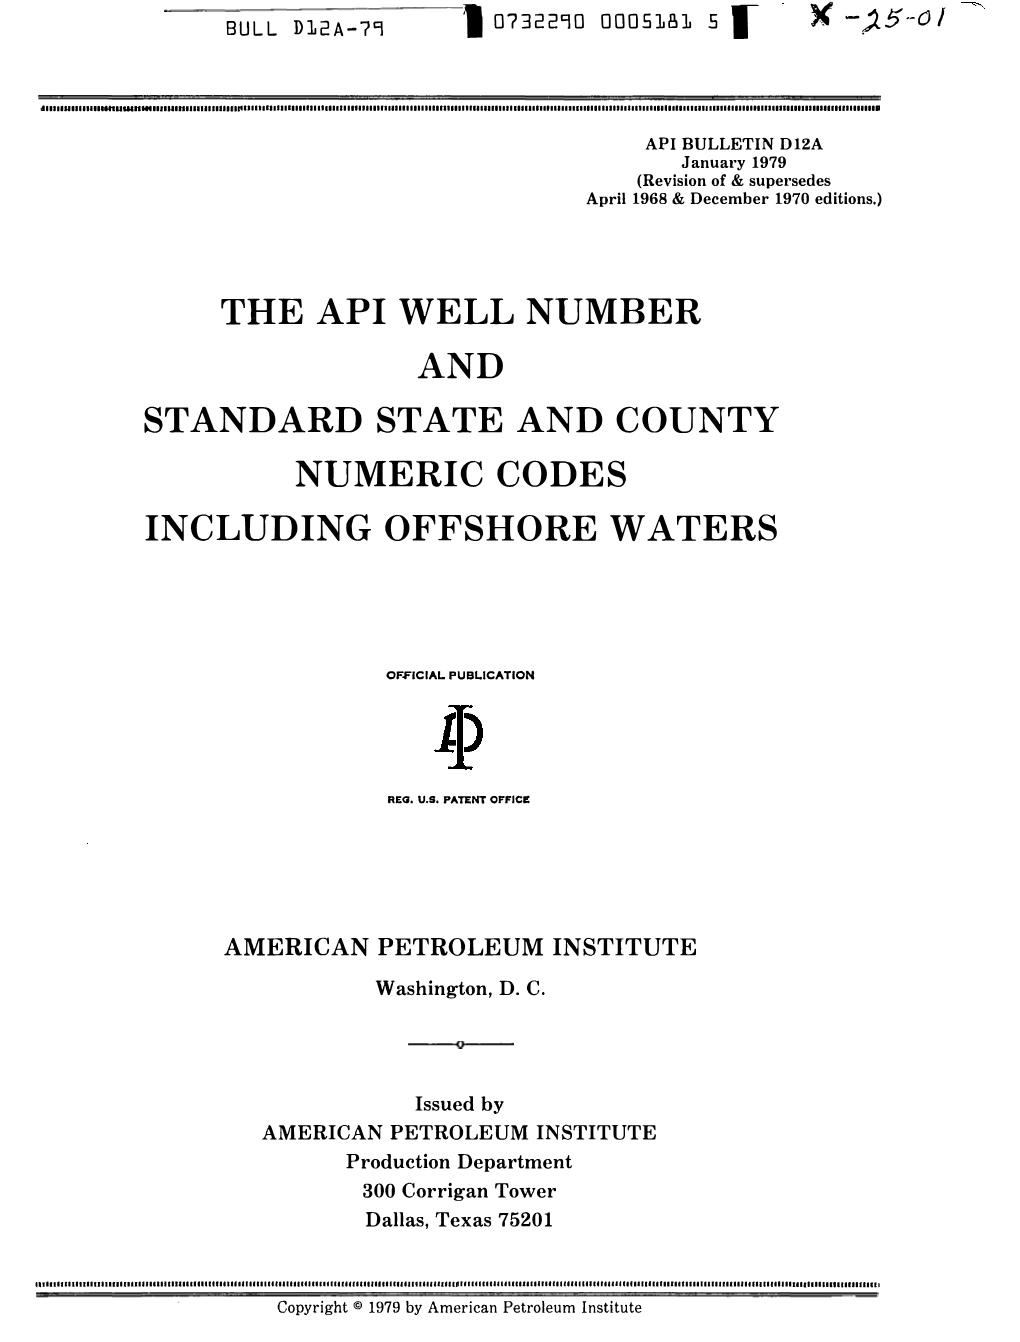 The Api Well Number and Standard State and County Numeric Codes Including Offshore Waters